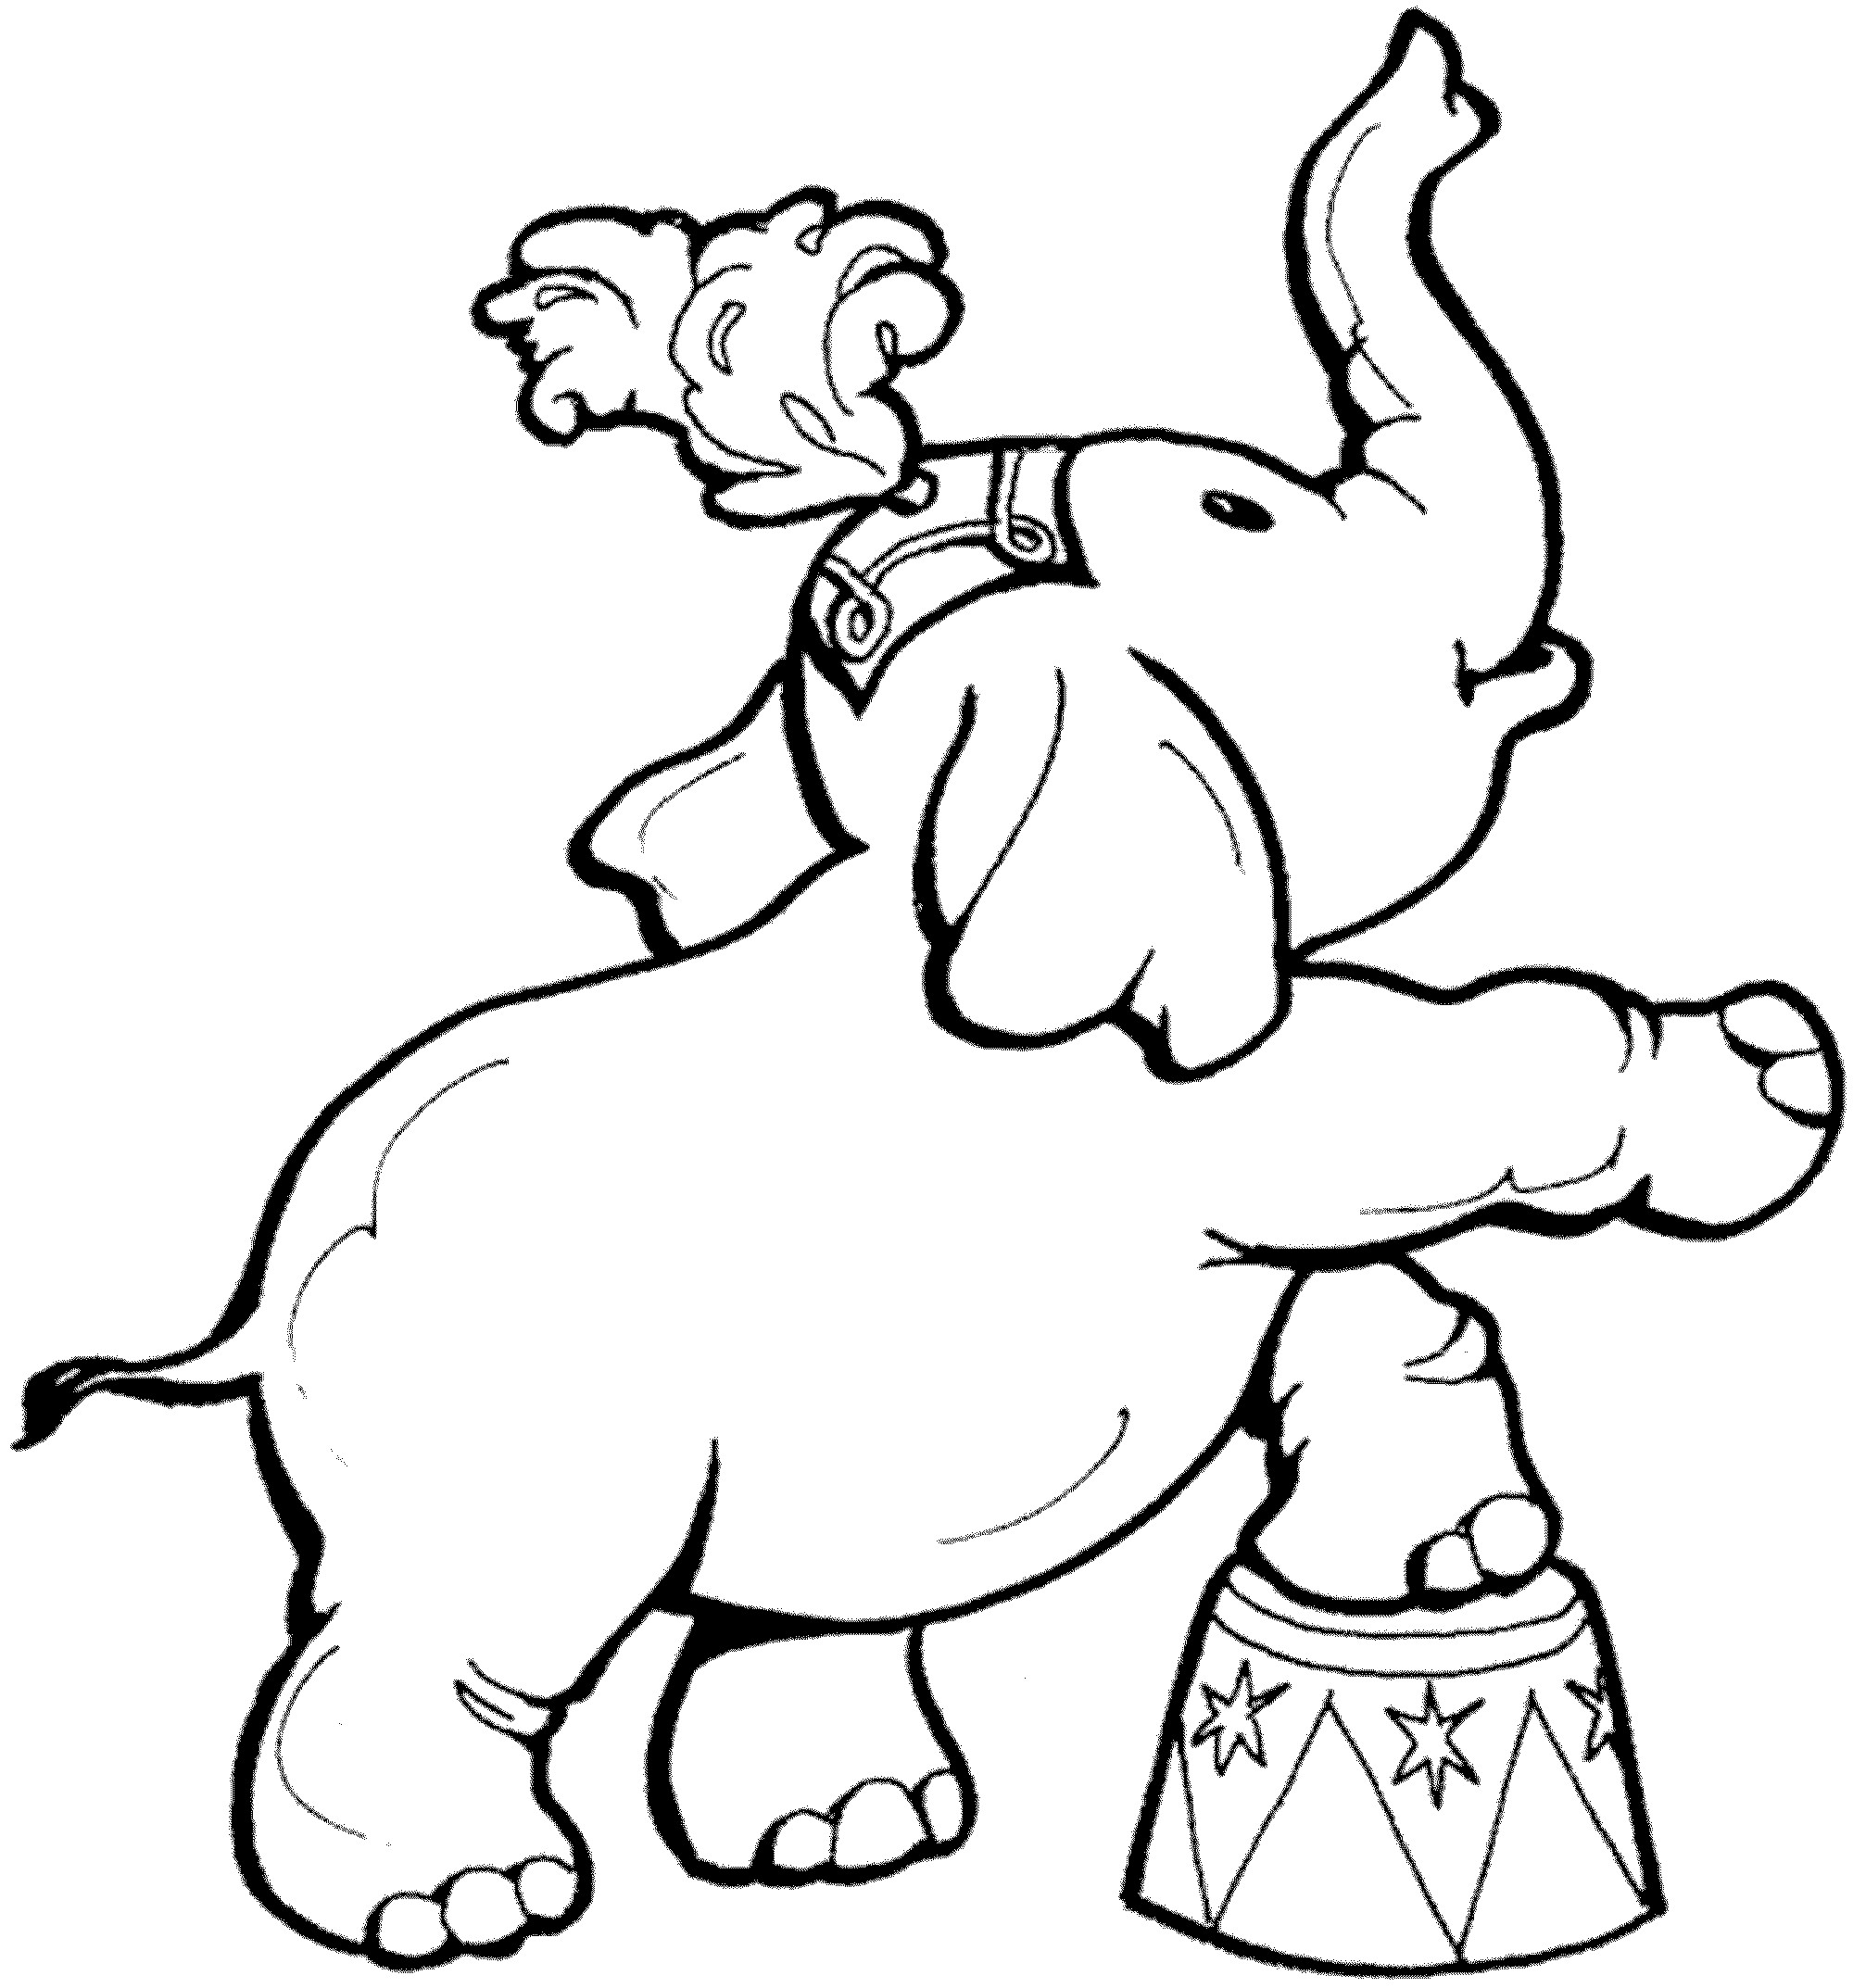 Elephant Coloring Pages For Kids
 Print & Download Teaching Kids through Elephant Coloring